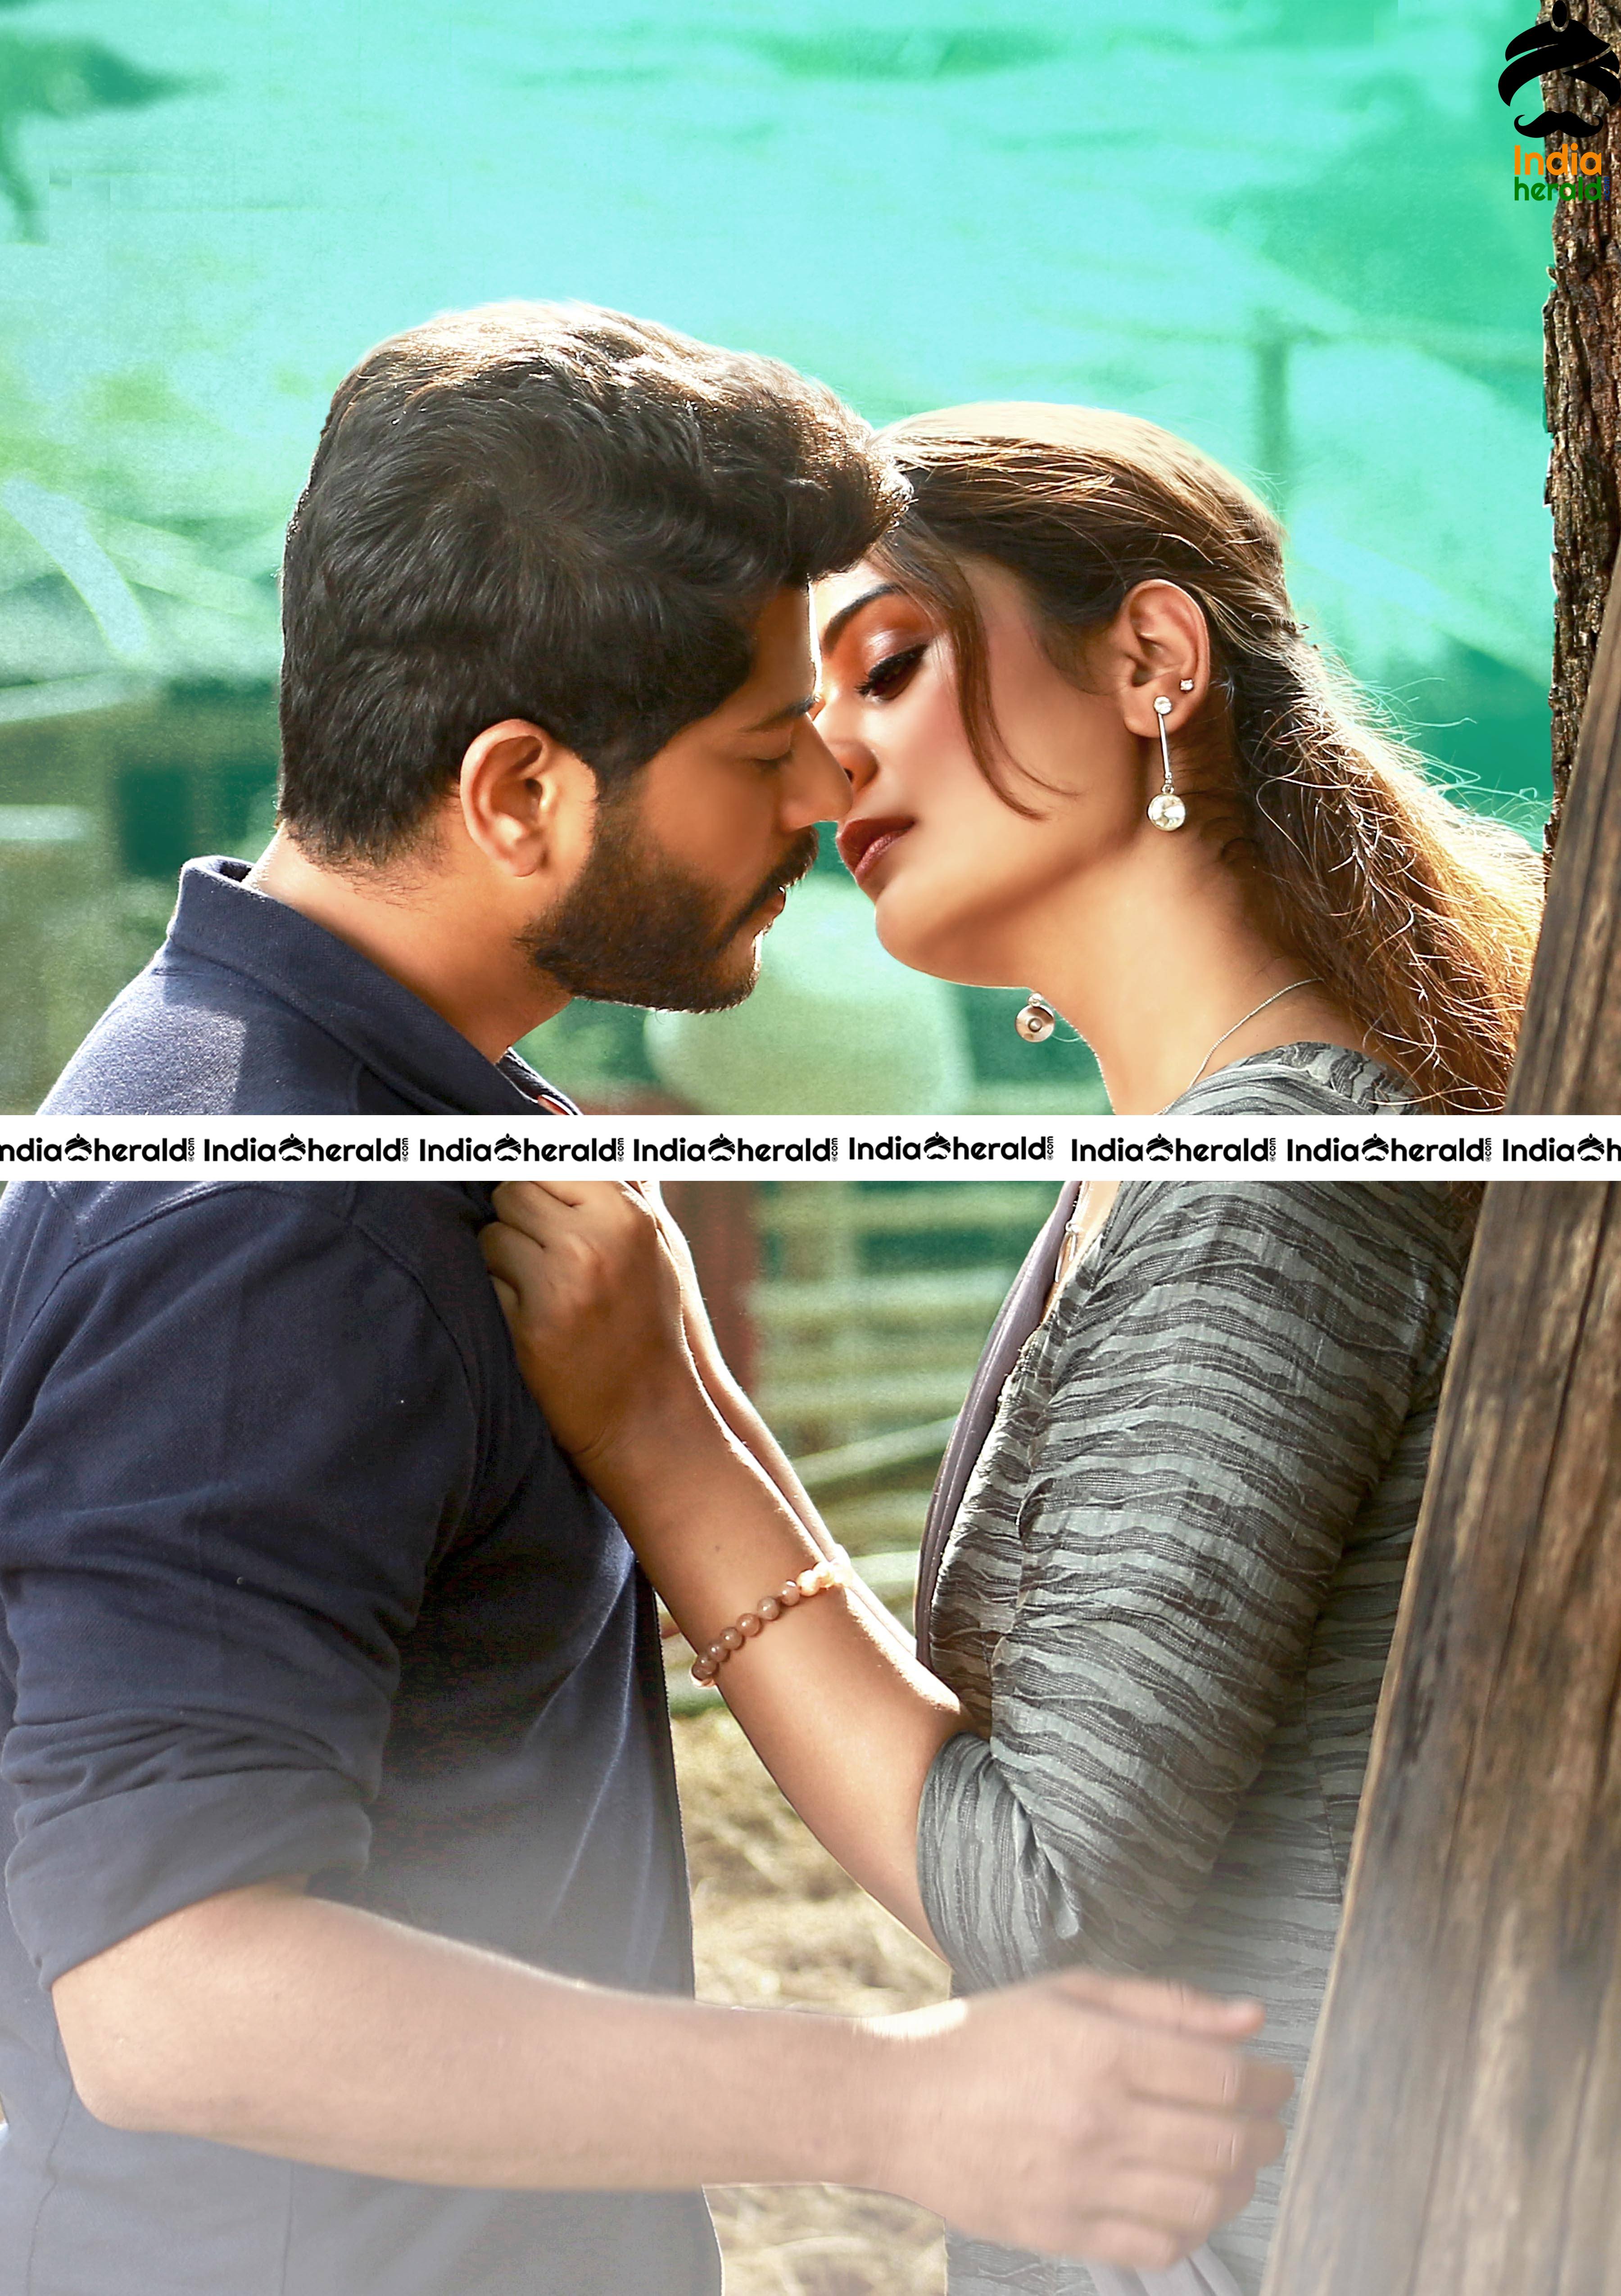 Payal Rajput RDX Love Release Date Posters And HD Stills